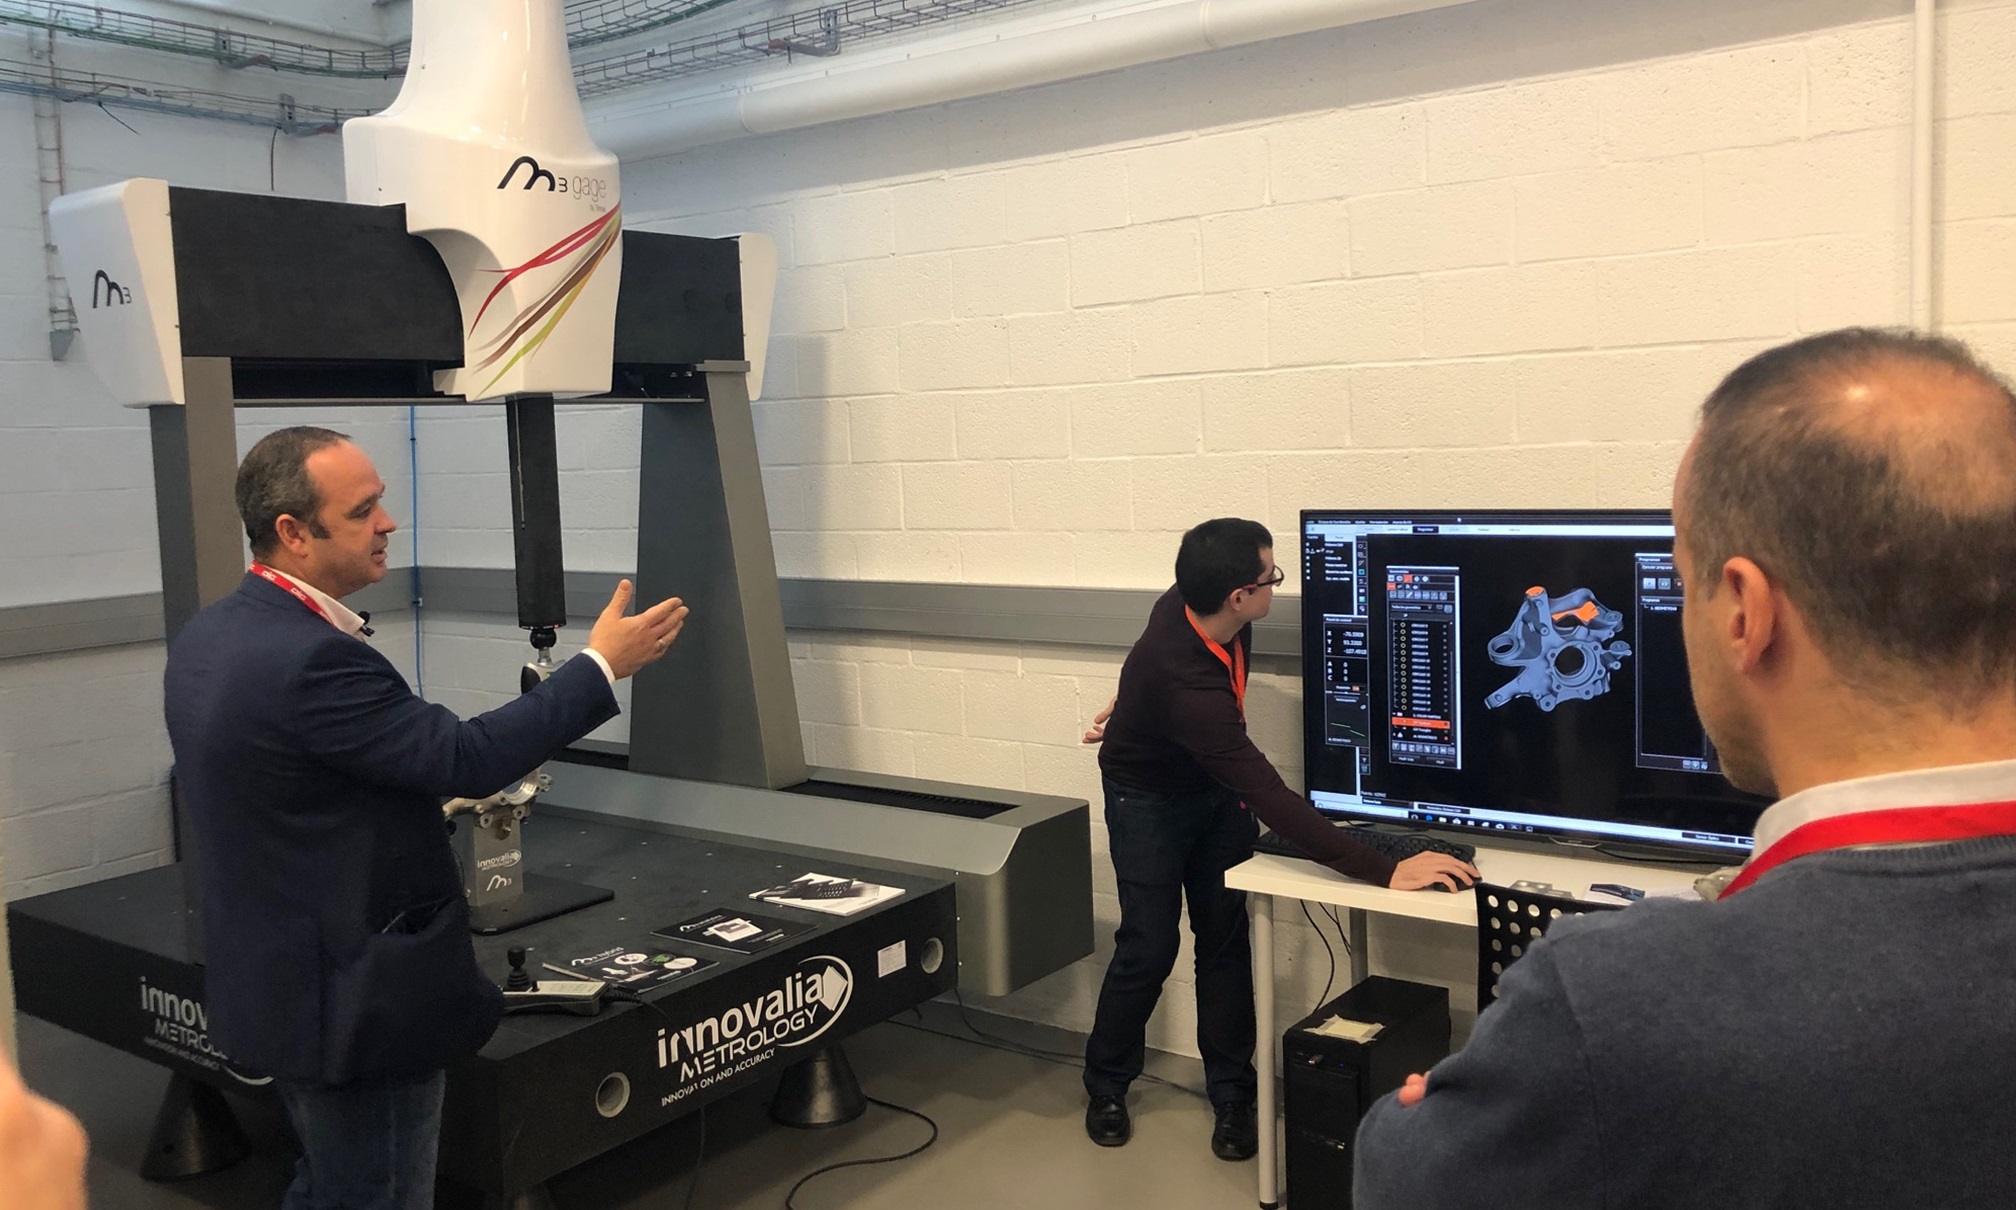 Innovalia Metrology hosted the Intelligent Metrology Workshop in its Advanced Metrology Lab in the AIC